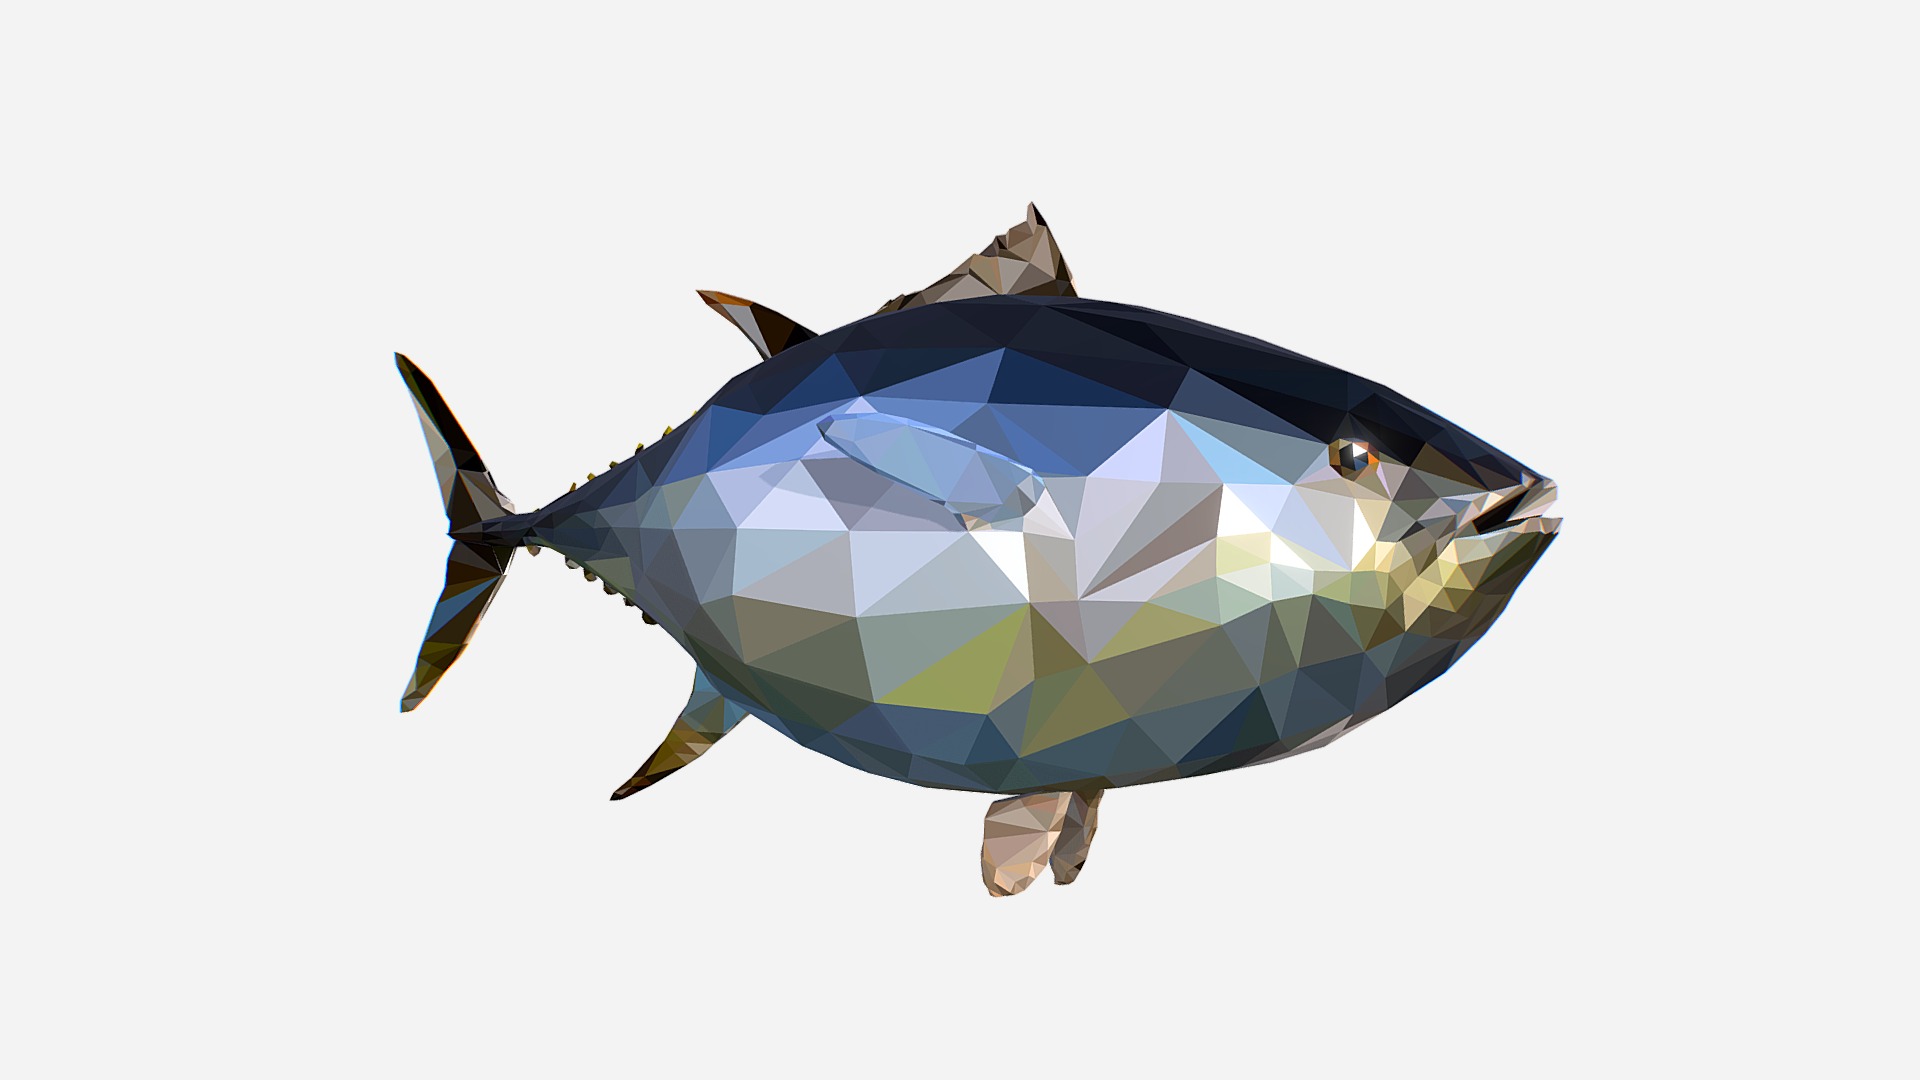 3D model Tuna Low Polygon Art Ocean Fish - This is a 3D model of the Tuna Low Polygon Art Ocean Fish. The 3D model is about a fish with a yellow and blue striped tail.